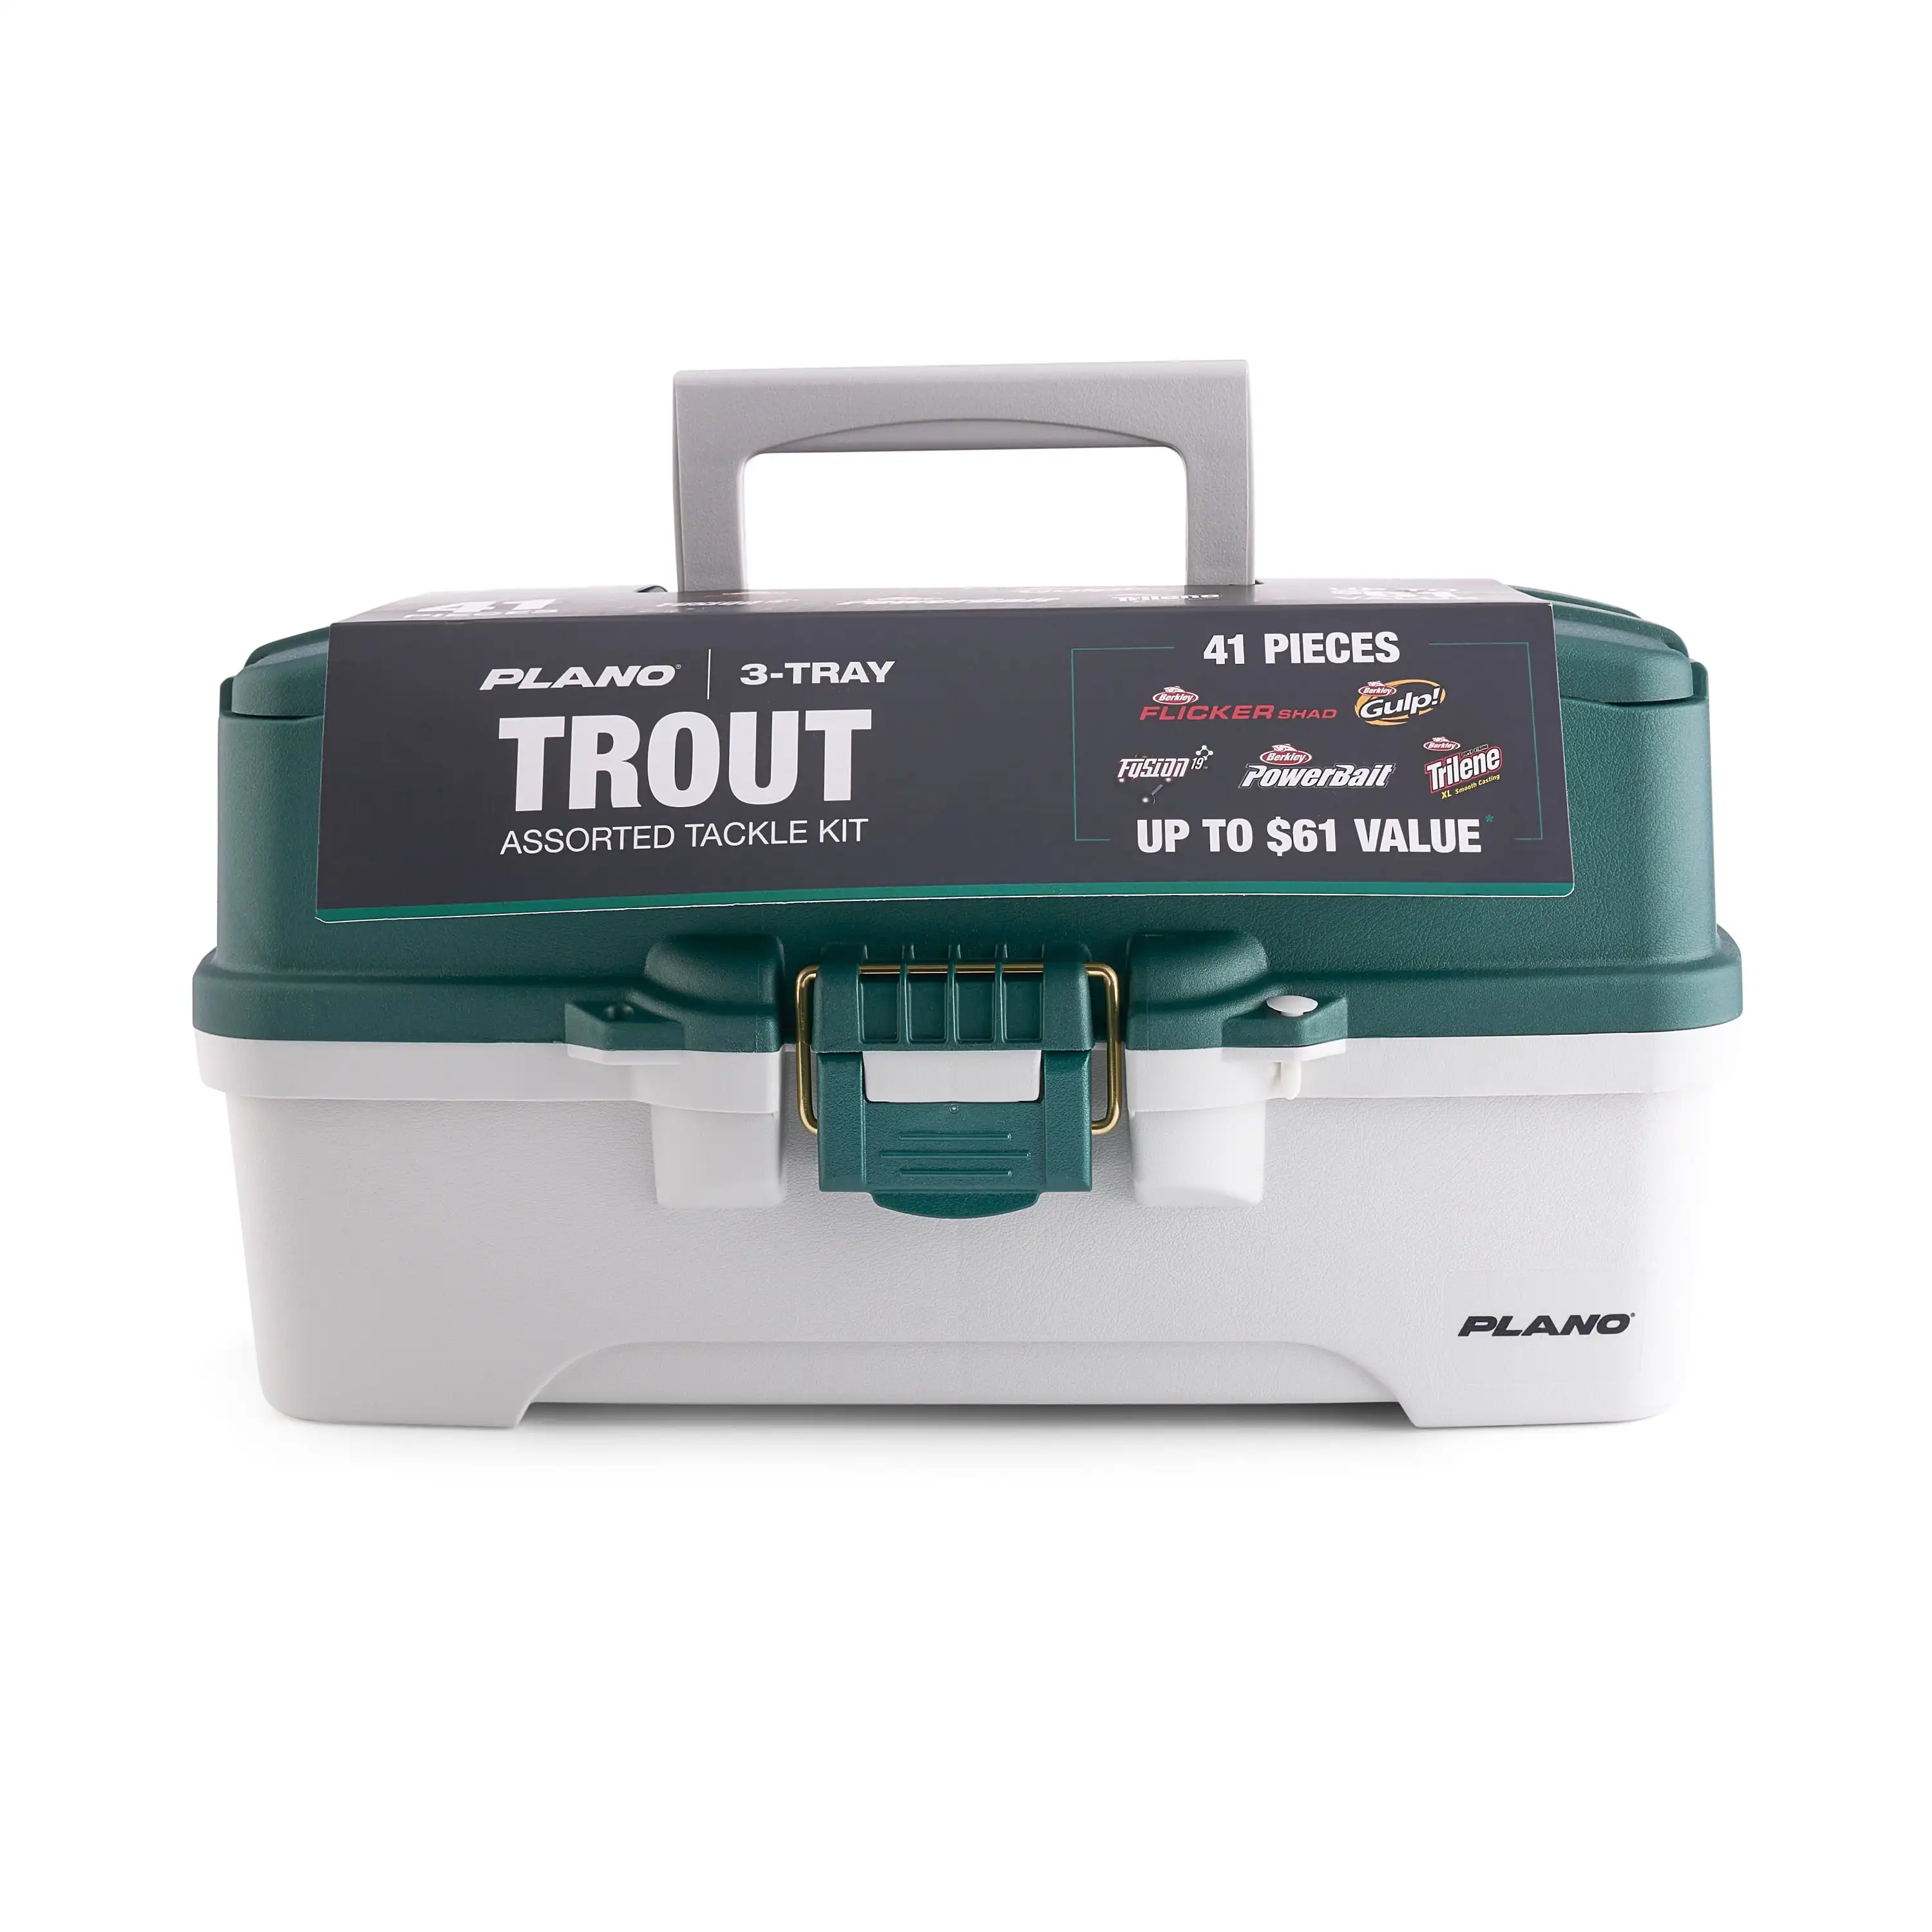 

Plano 3-Tray Tackle Box with Trout Bait Kit